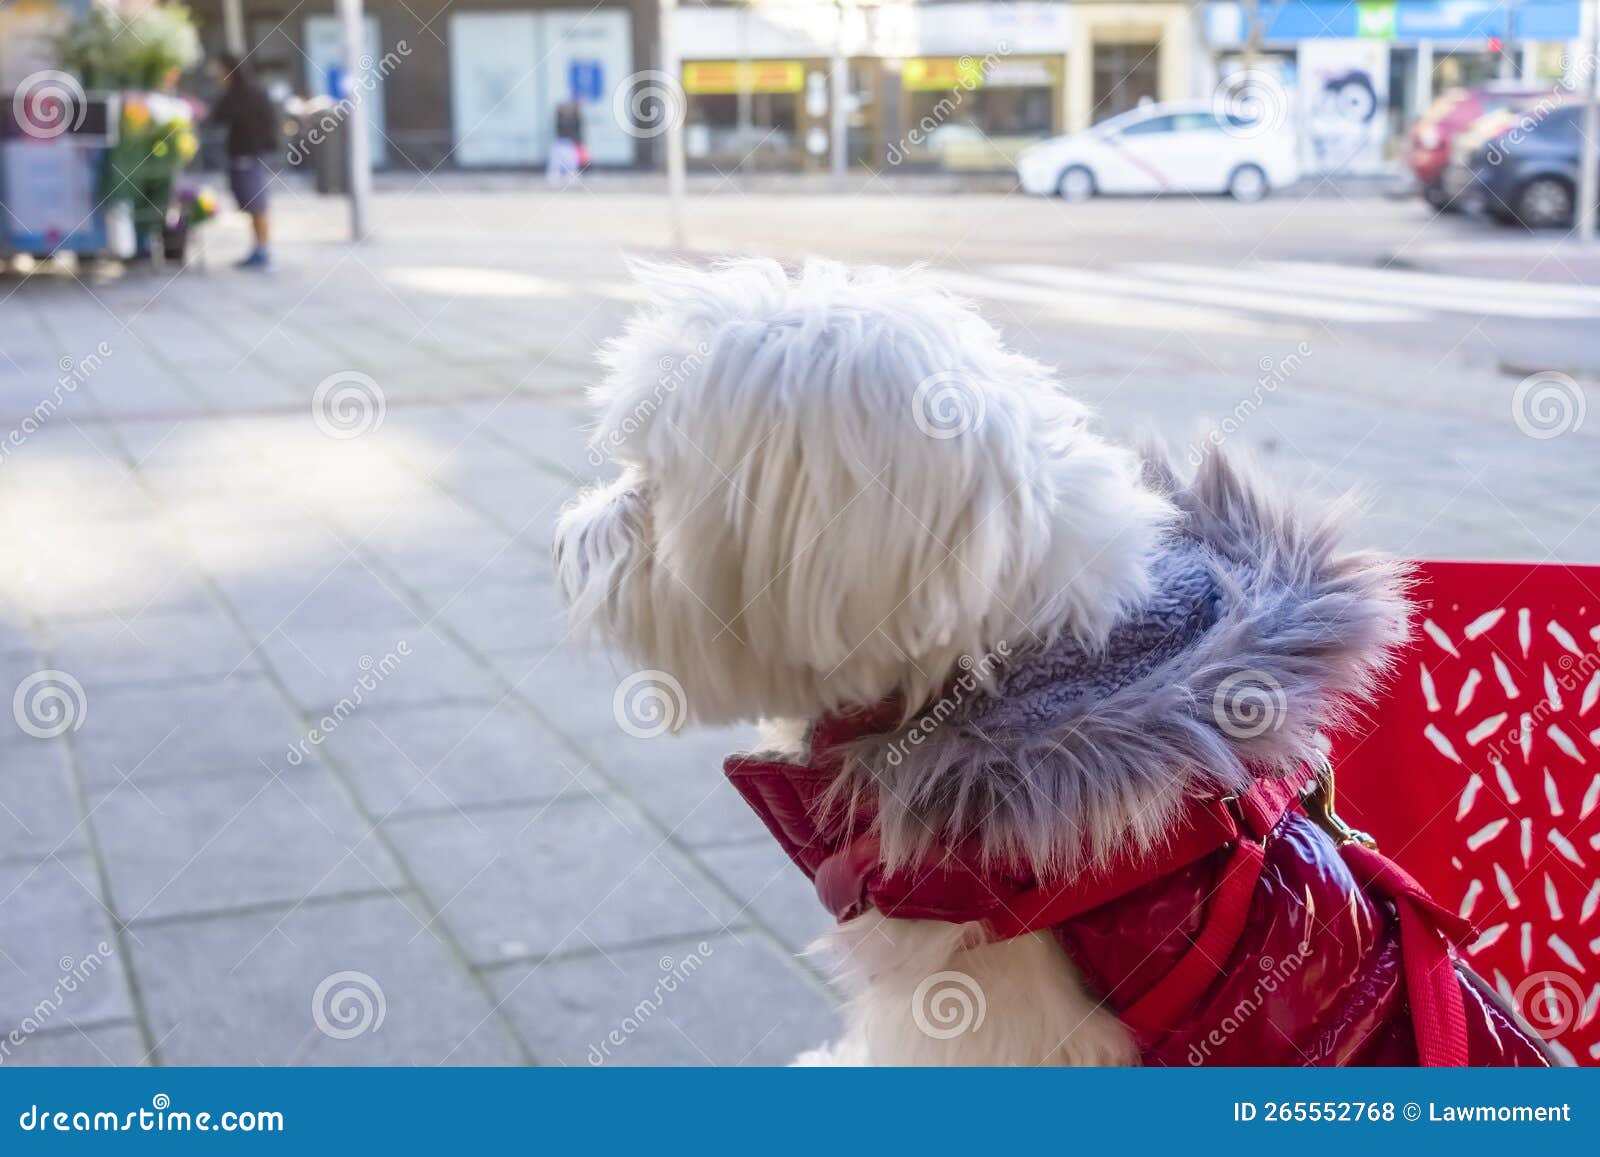 a bichon maltese dog looking at the street sitting on a chair at a terraza